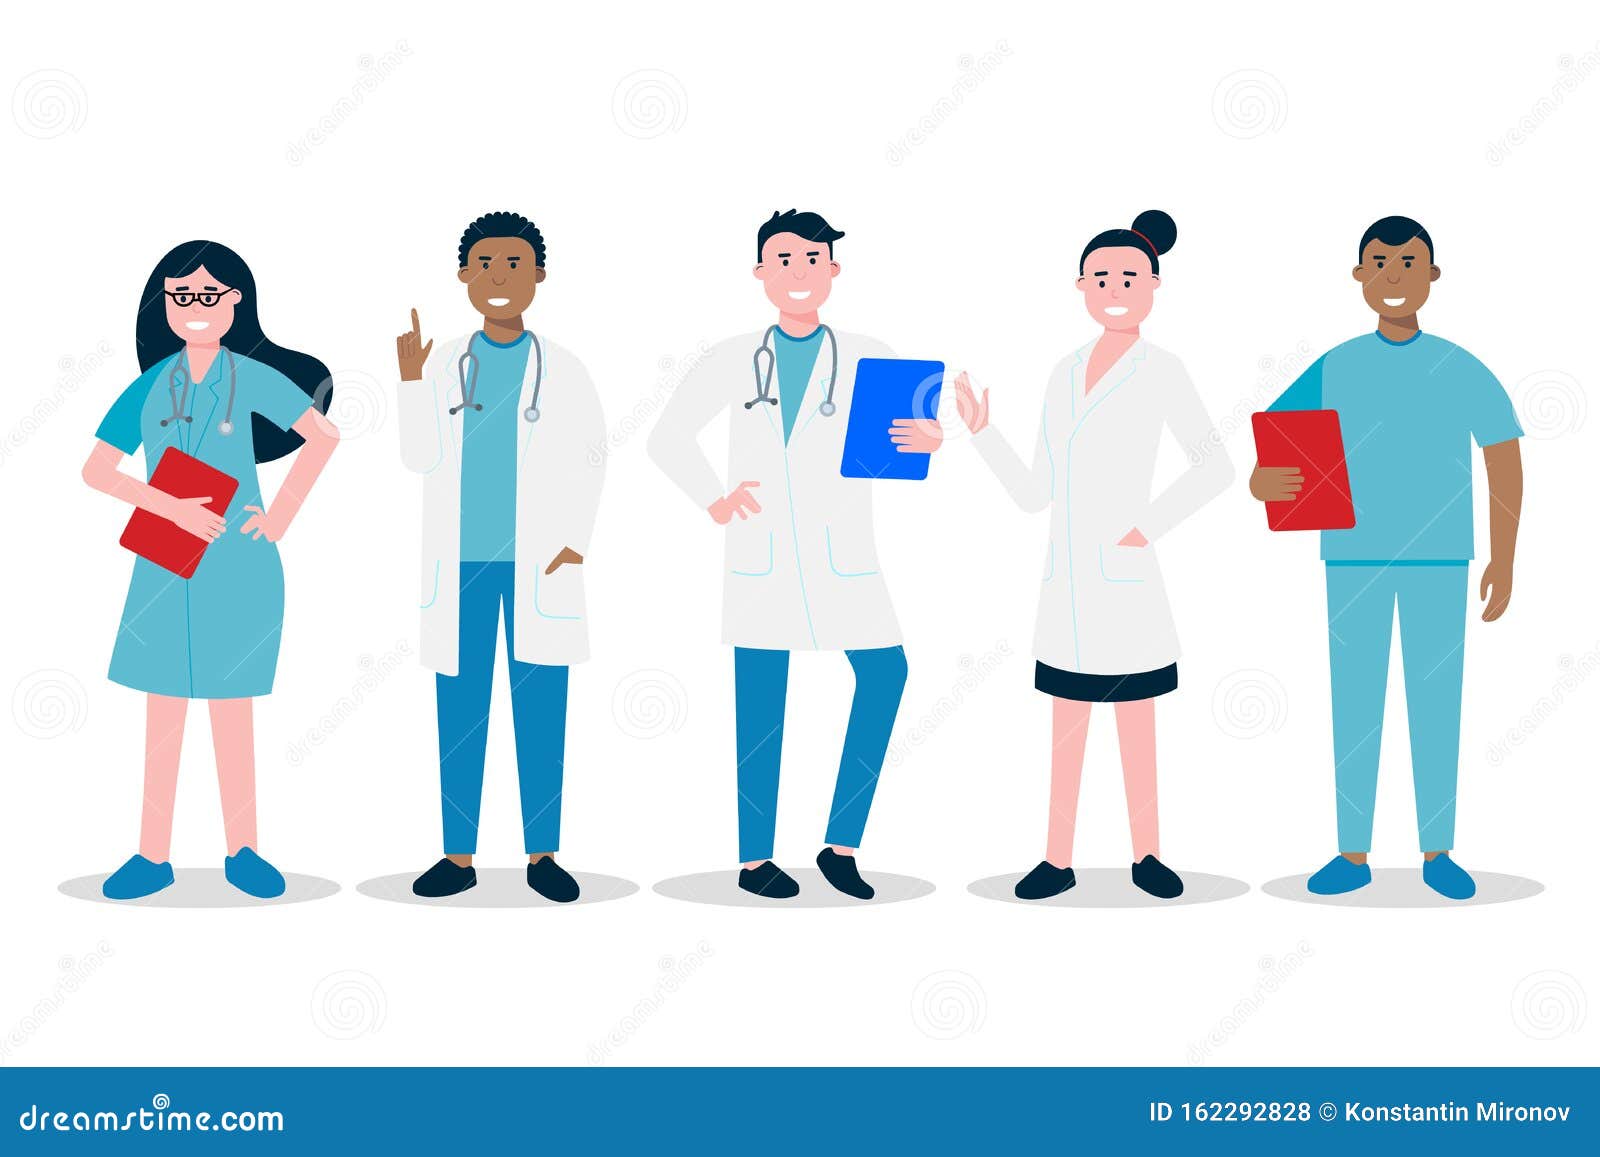 doctors and nurses standing and hold clipboards flat style  